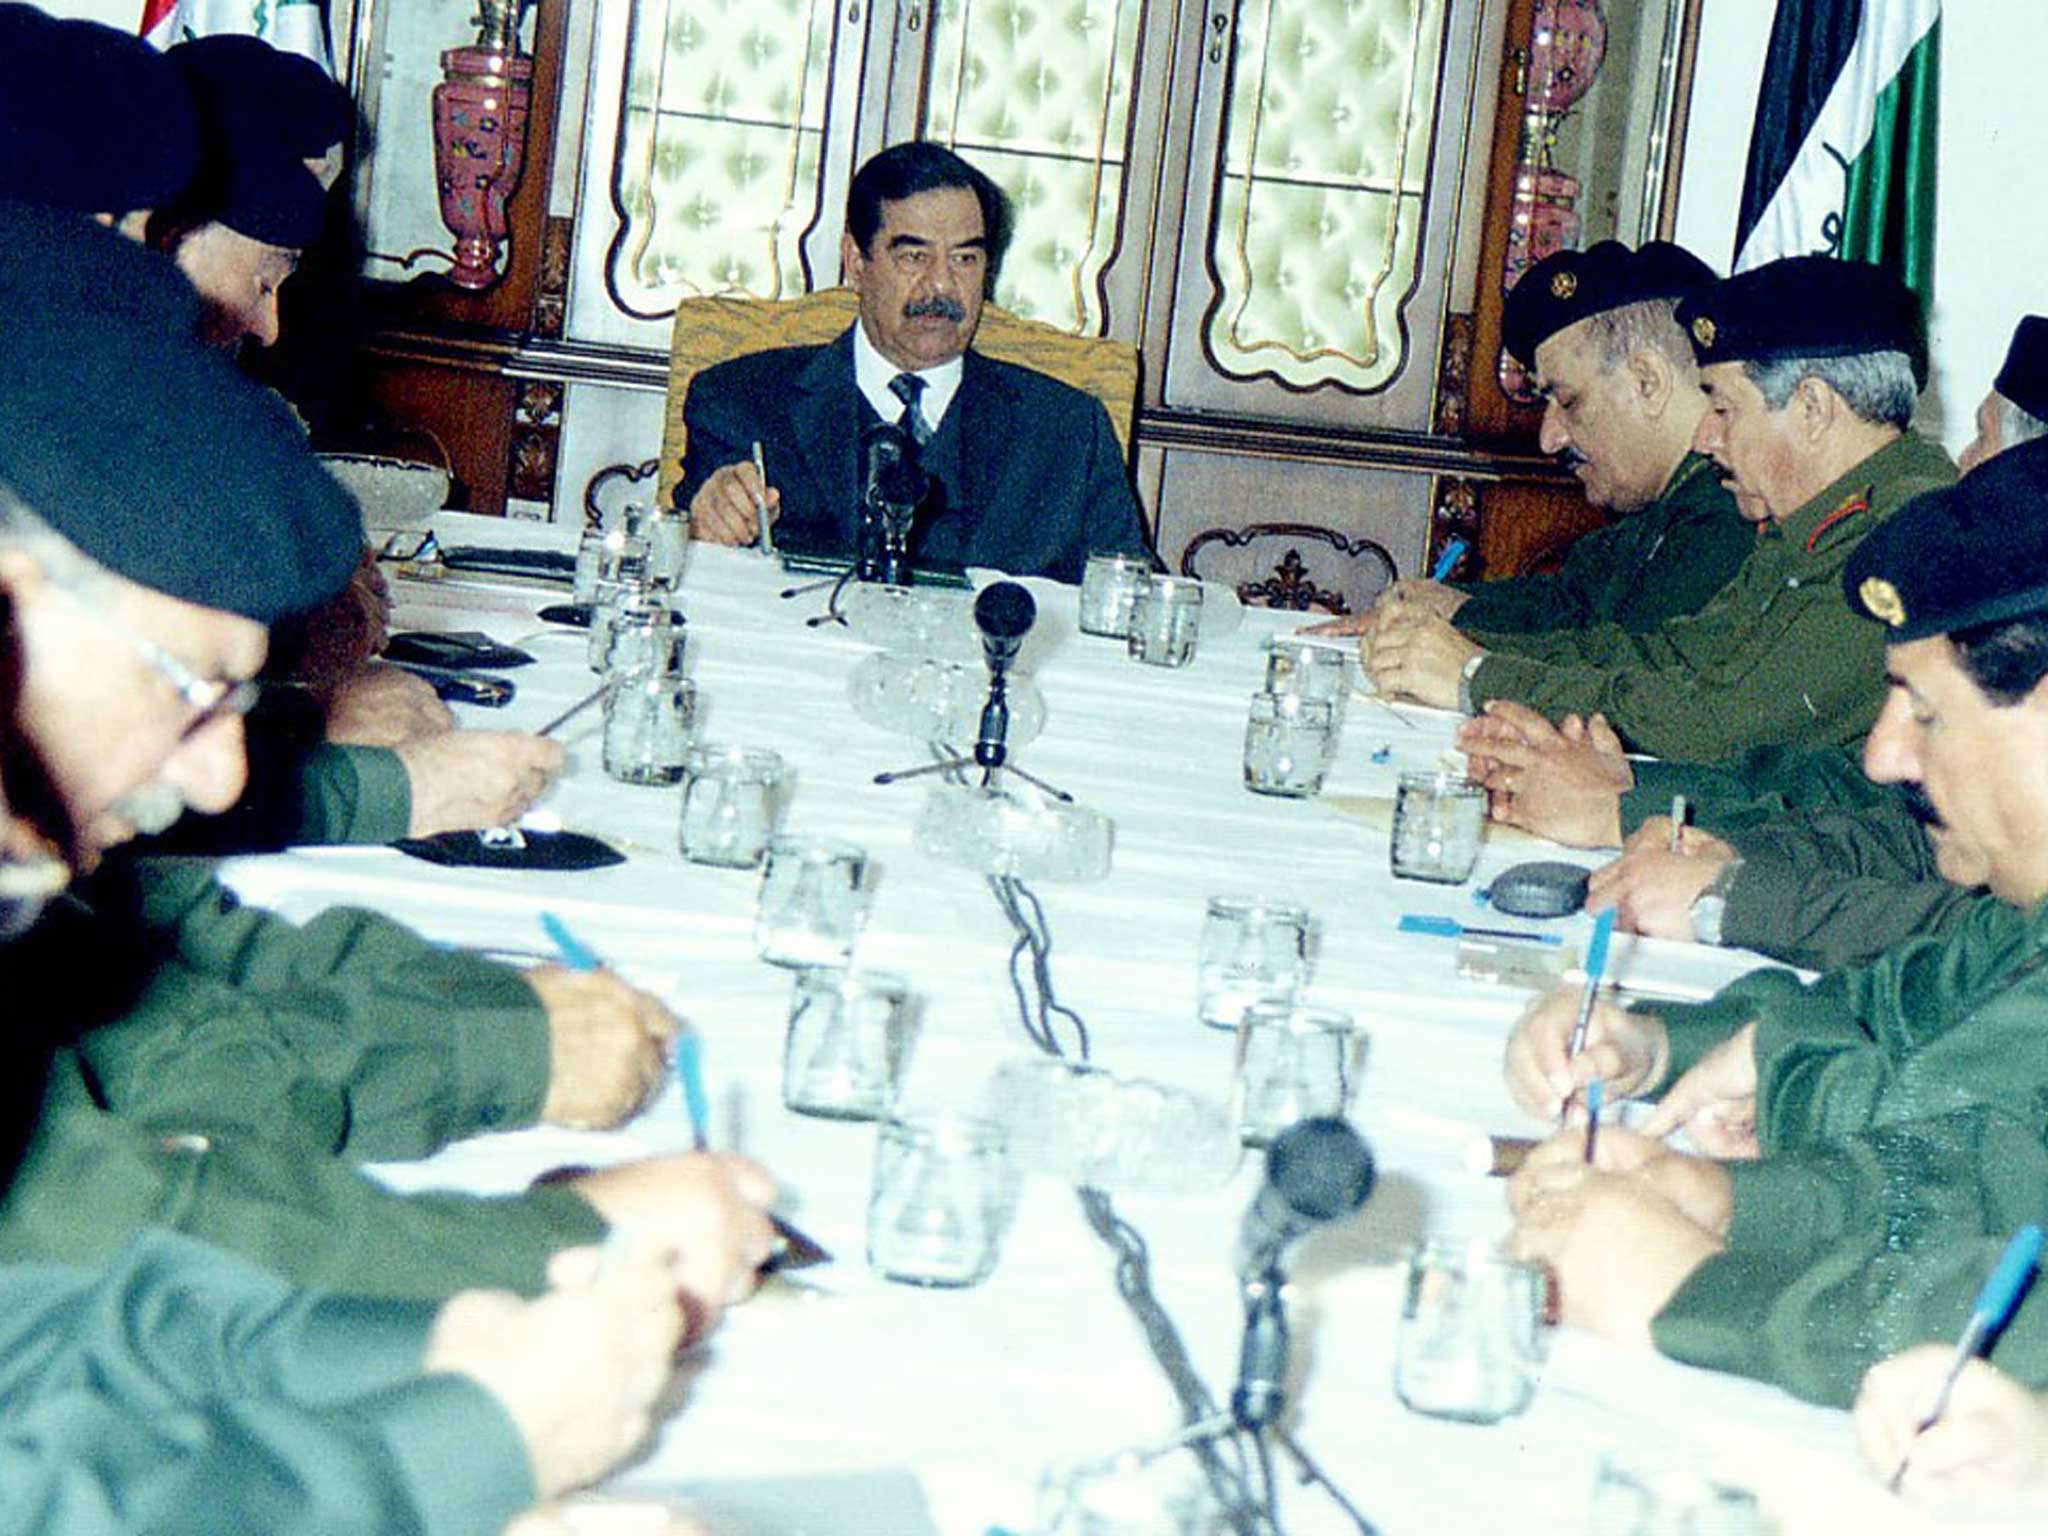 Saddam Hussein with his Revolutionary Command Council in 2003